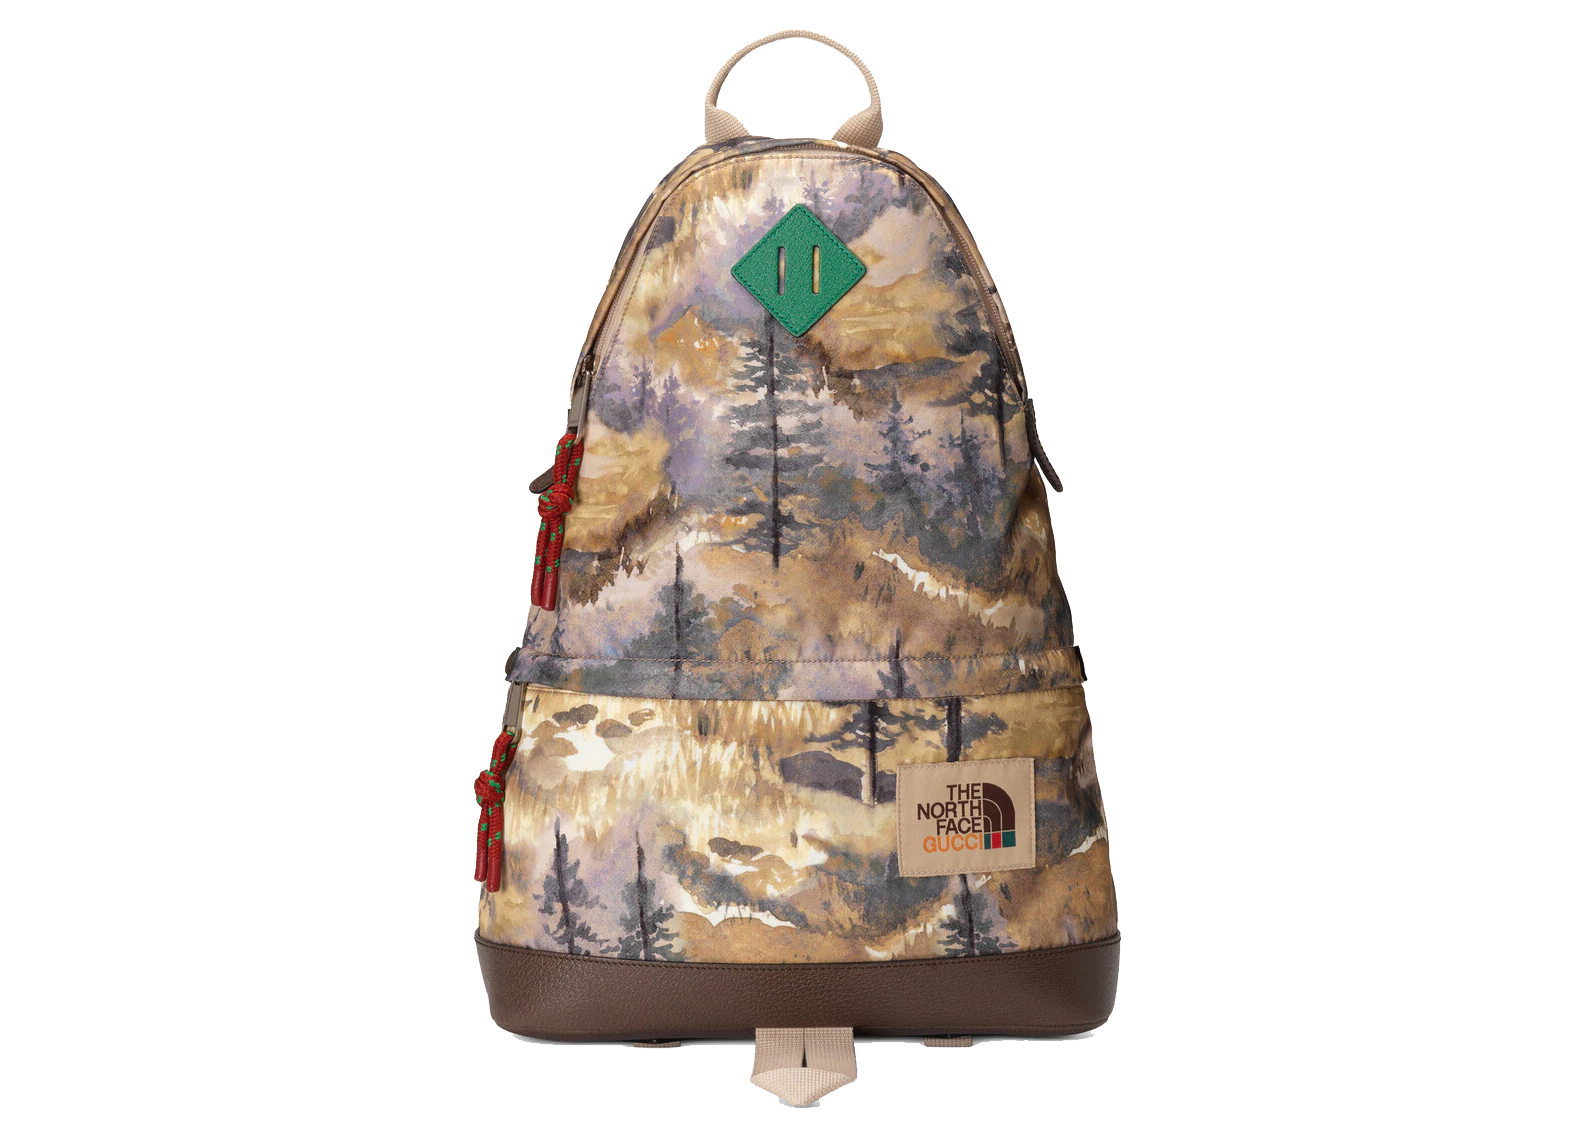 Gucci x The North Face Backpack Multicolor